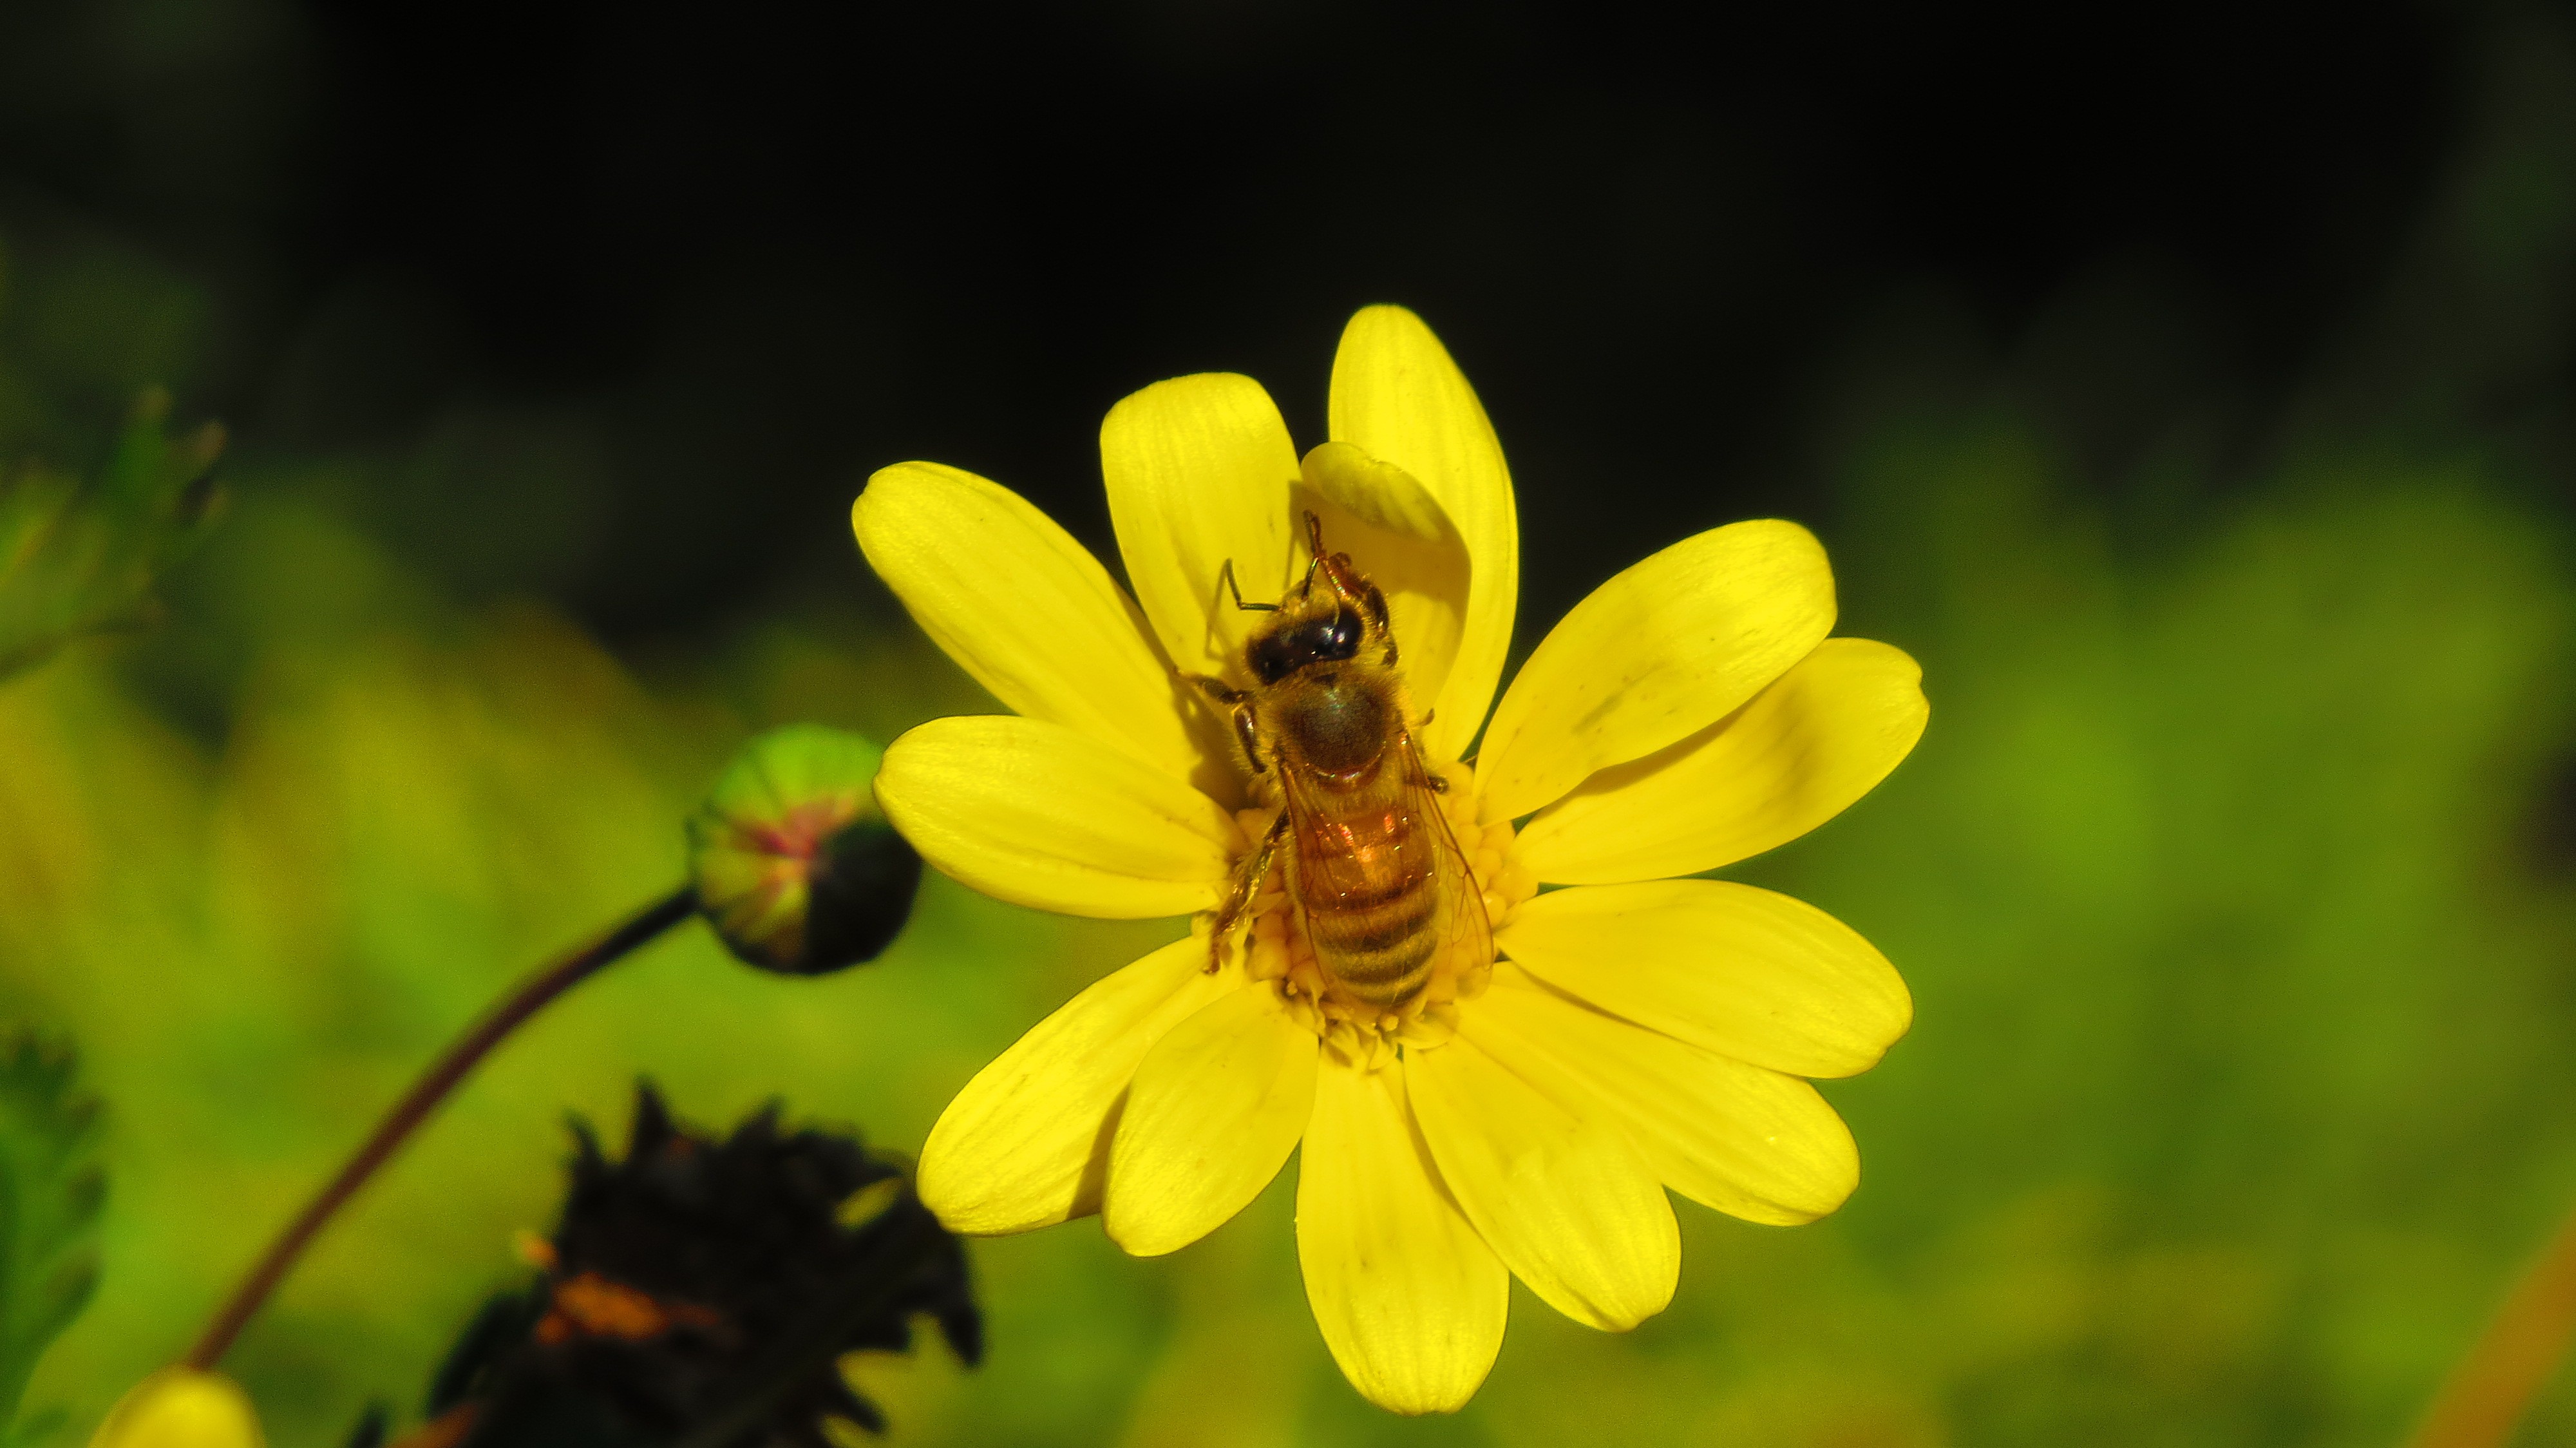 General 4000x2248 flowers yellow flowers bees nature animals insect closeup plants